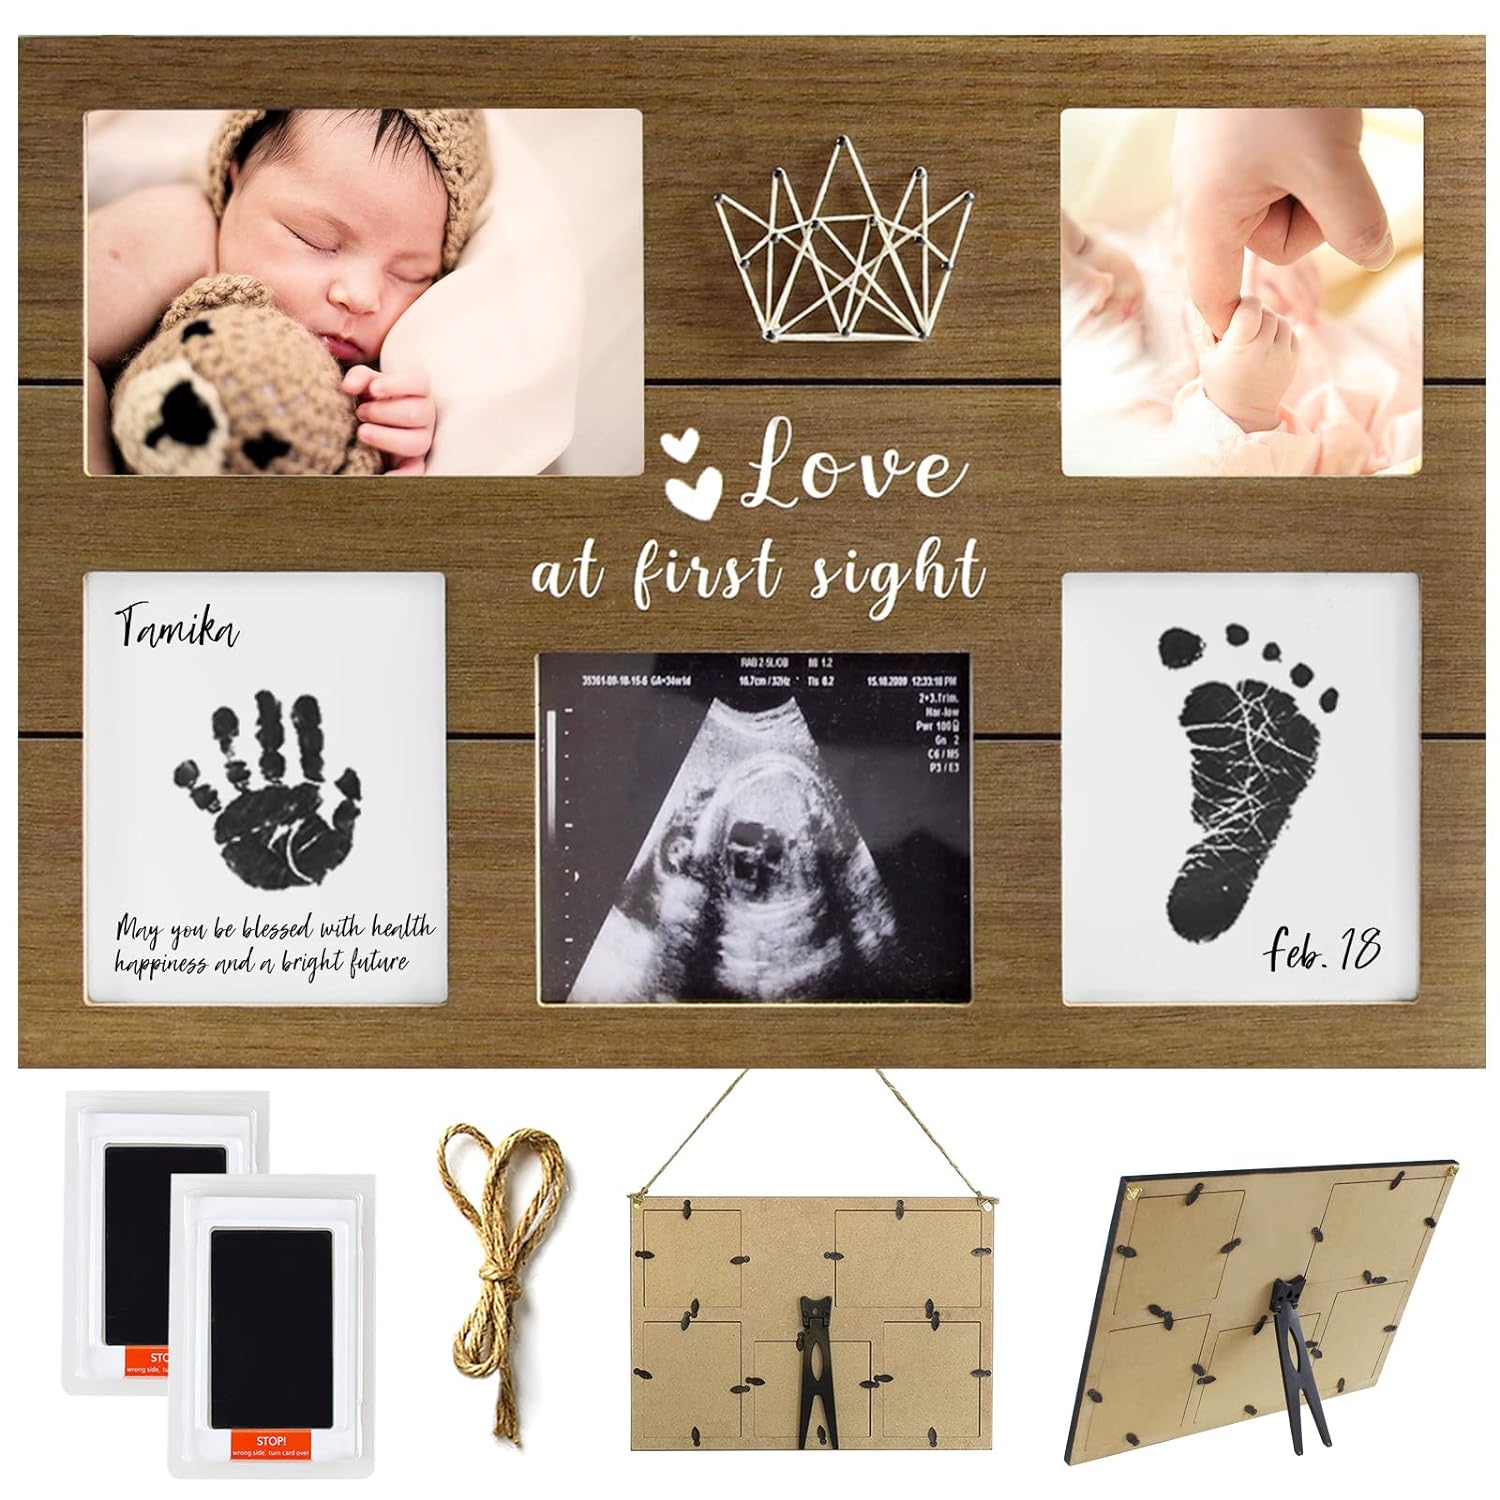 Baby Handprint Footprint Keepsake Kit – Ultrasound and Newborn Picture Brown Nursery Decorative Wood Frame Kit with No-Clean Print Pad for Baby Shower or New Parents Gift